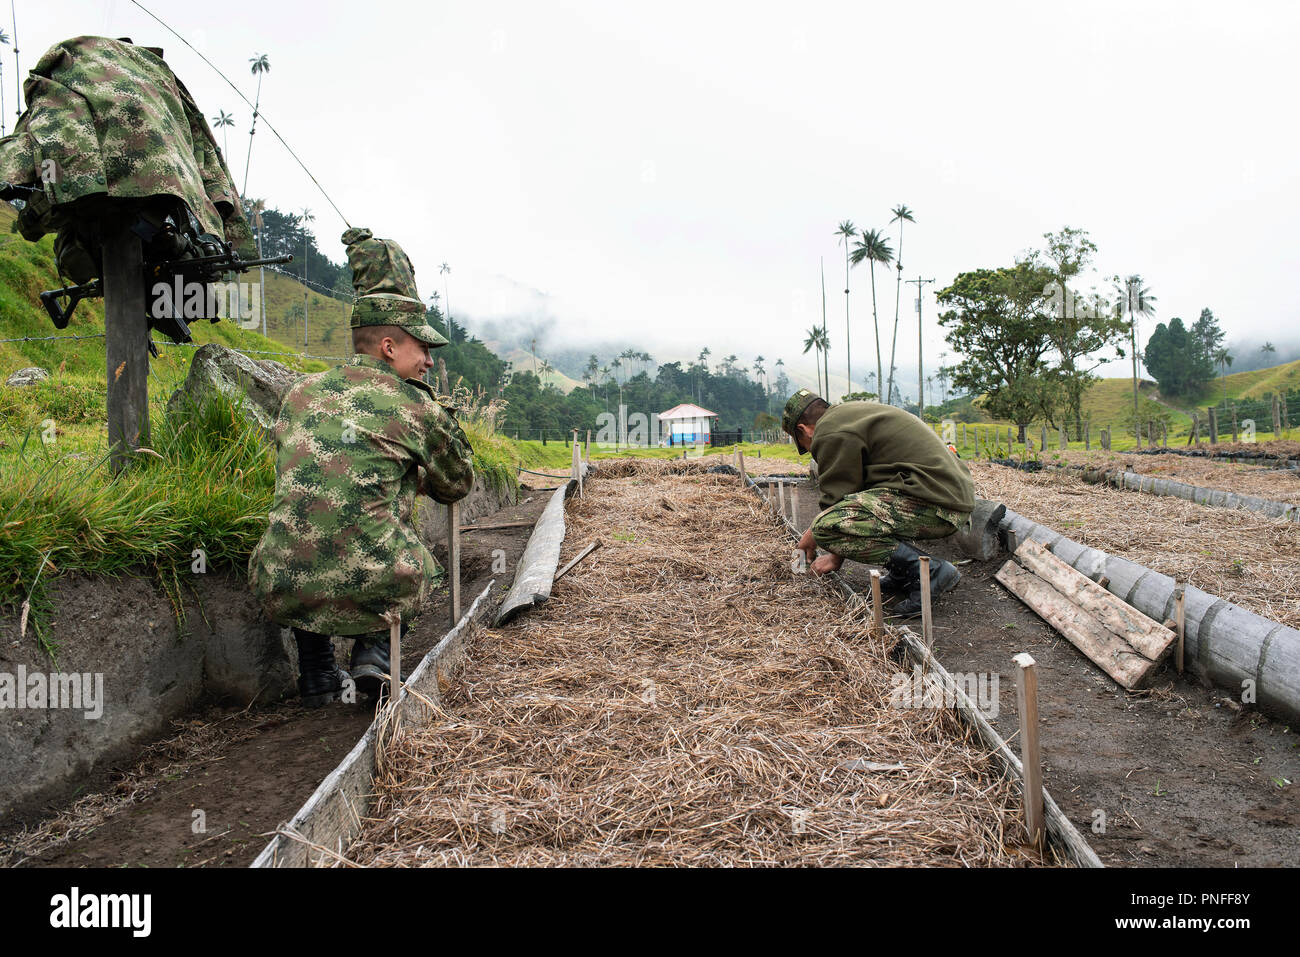 4/10 PHOTO ESSAY: Covering the planted seeds for protection. The National Army working on wax palm plantation in Cocora Valley, Colombia. 13 Sep 2018 Stock Photo